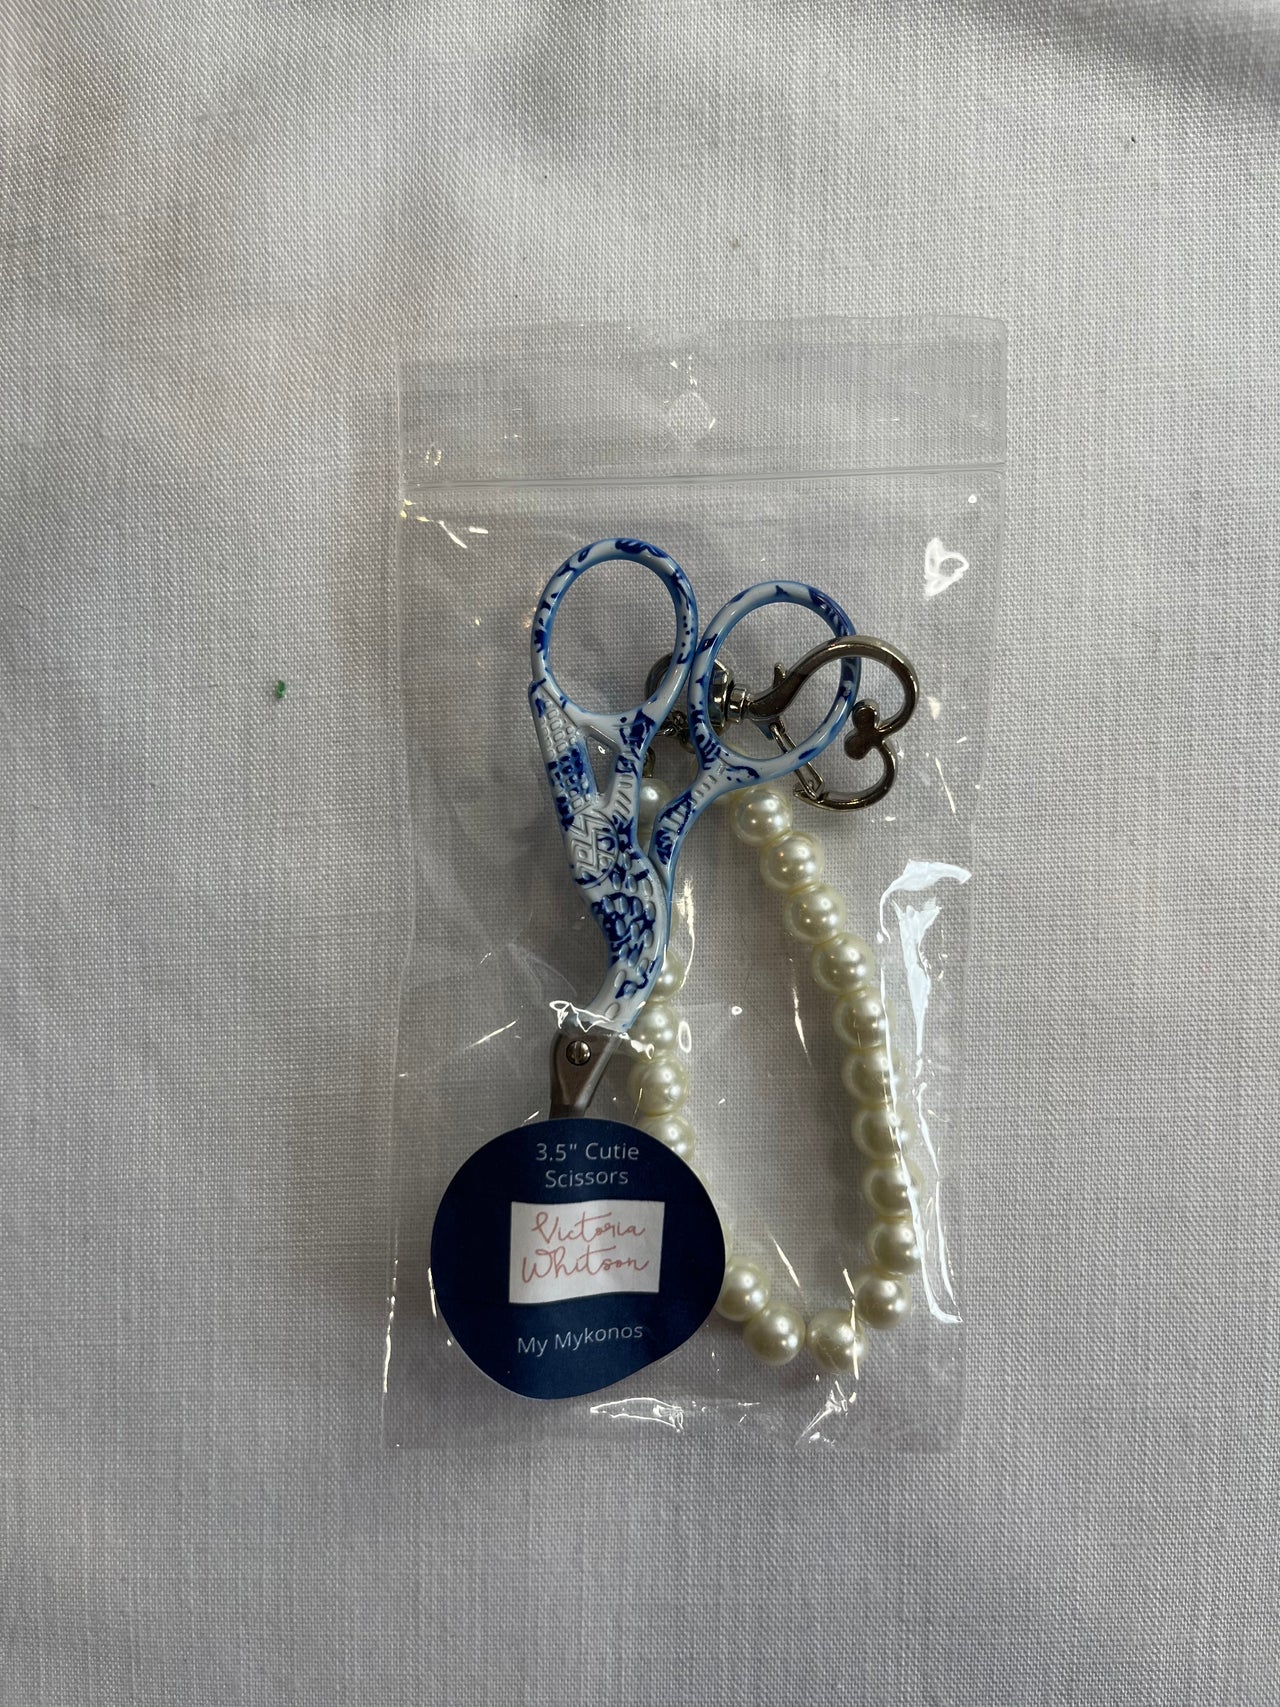 VW Cutie Scissors with Pearl Fob